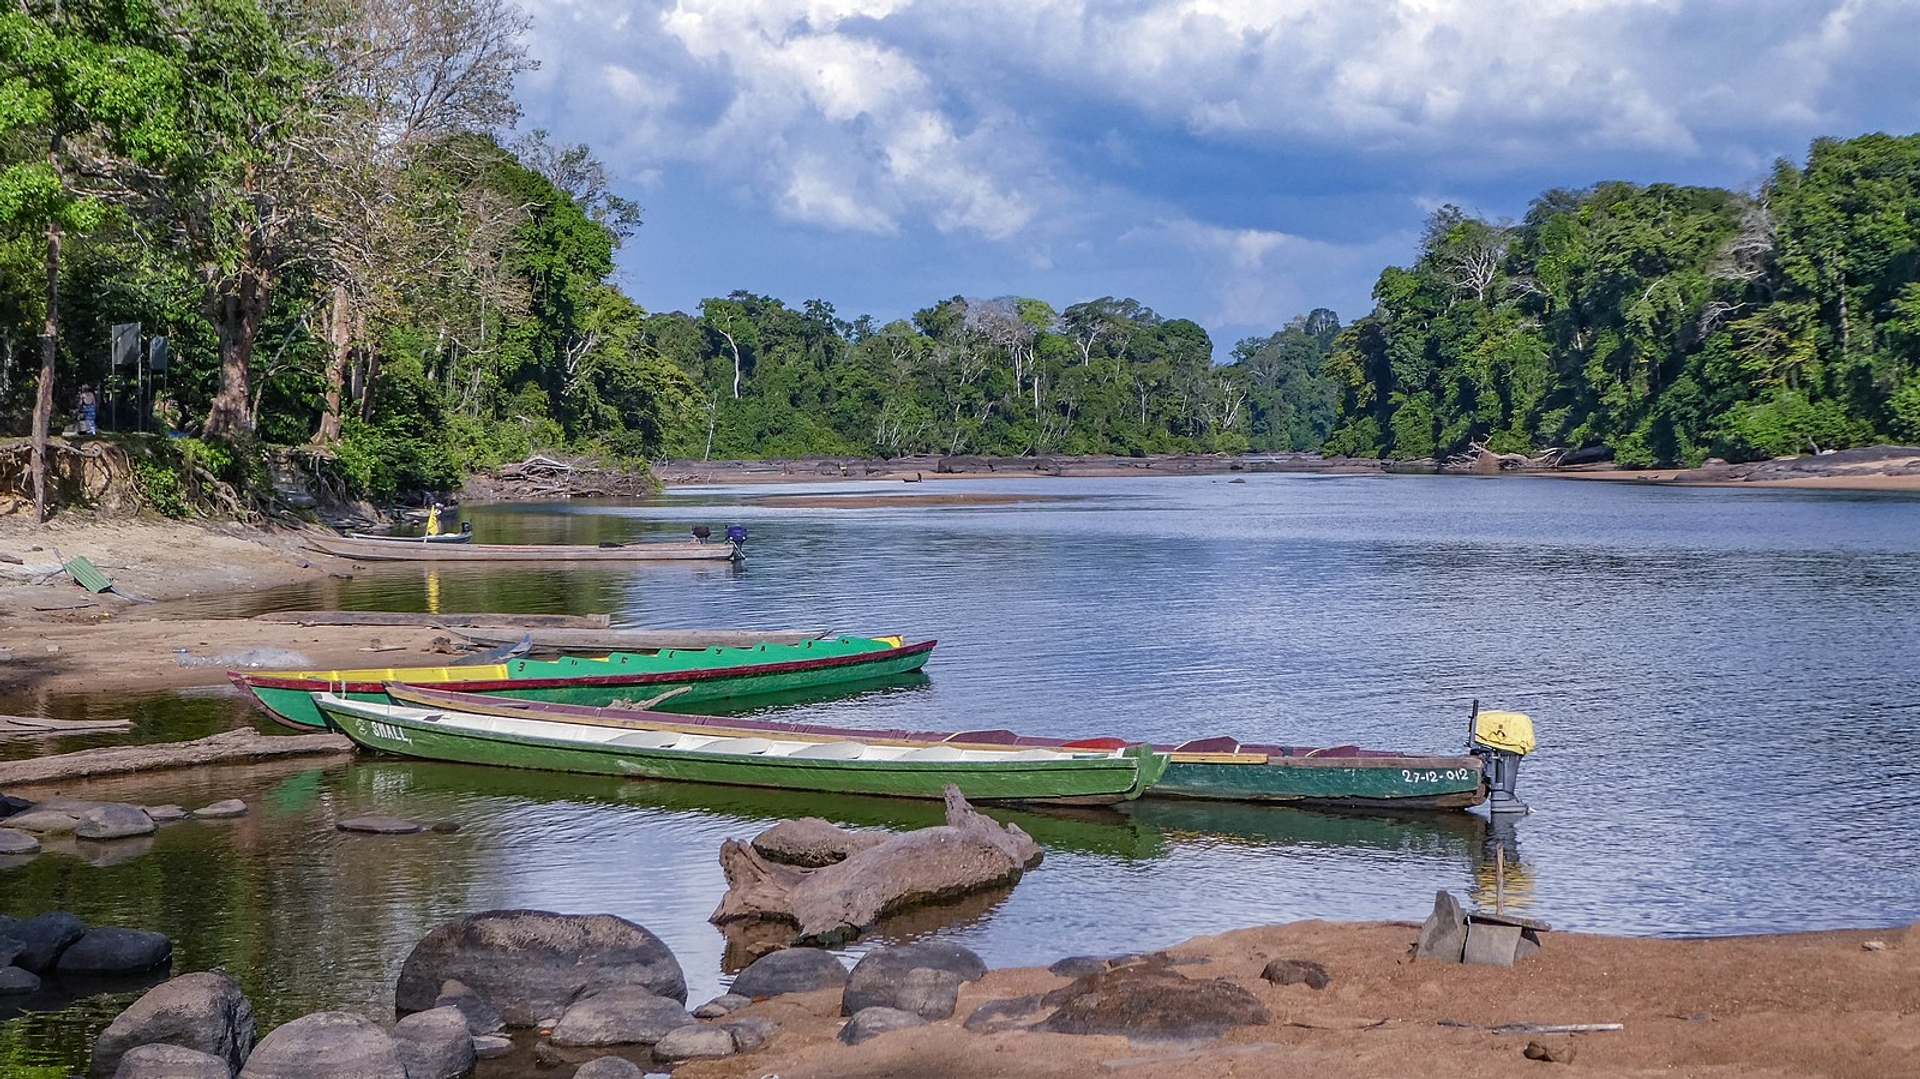 View_of_the_Suriname_River_from_the_Gunsi_shore_(32694093314)